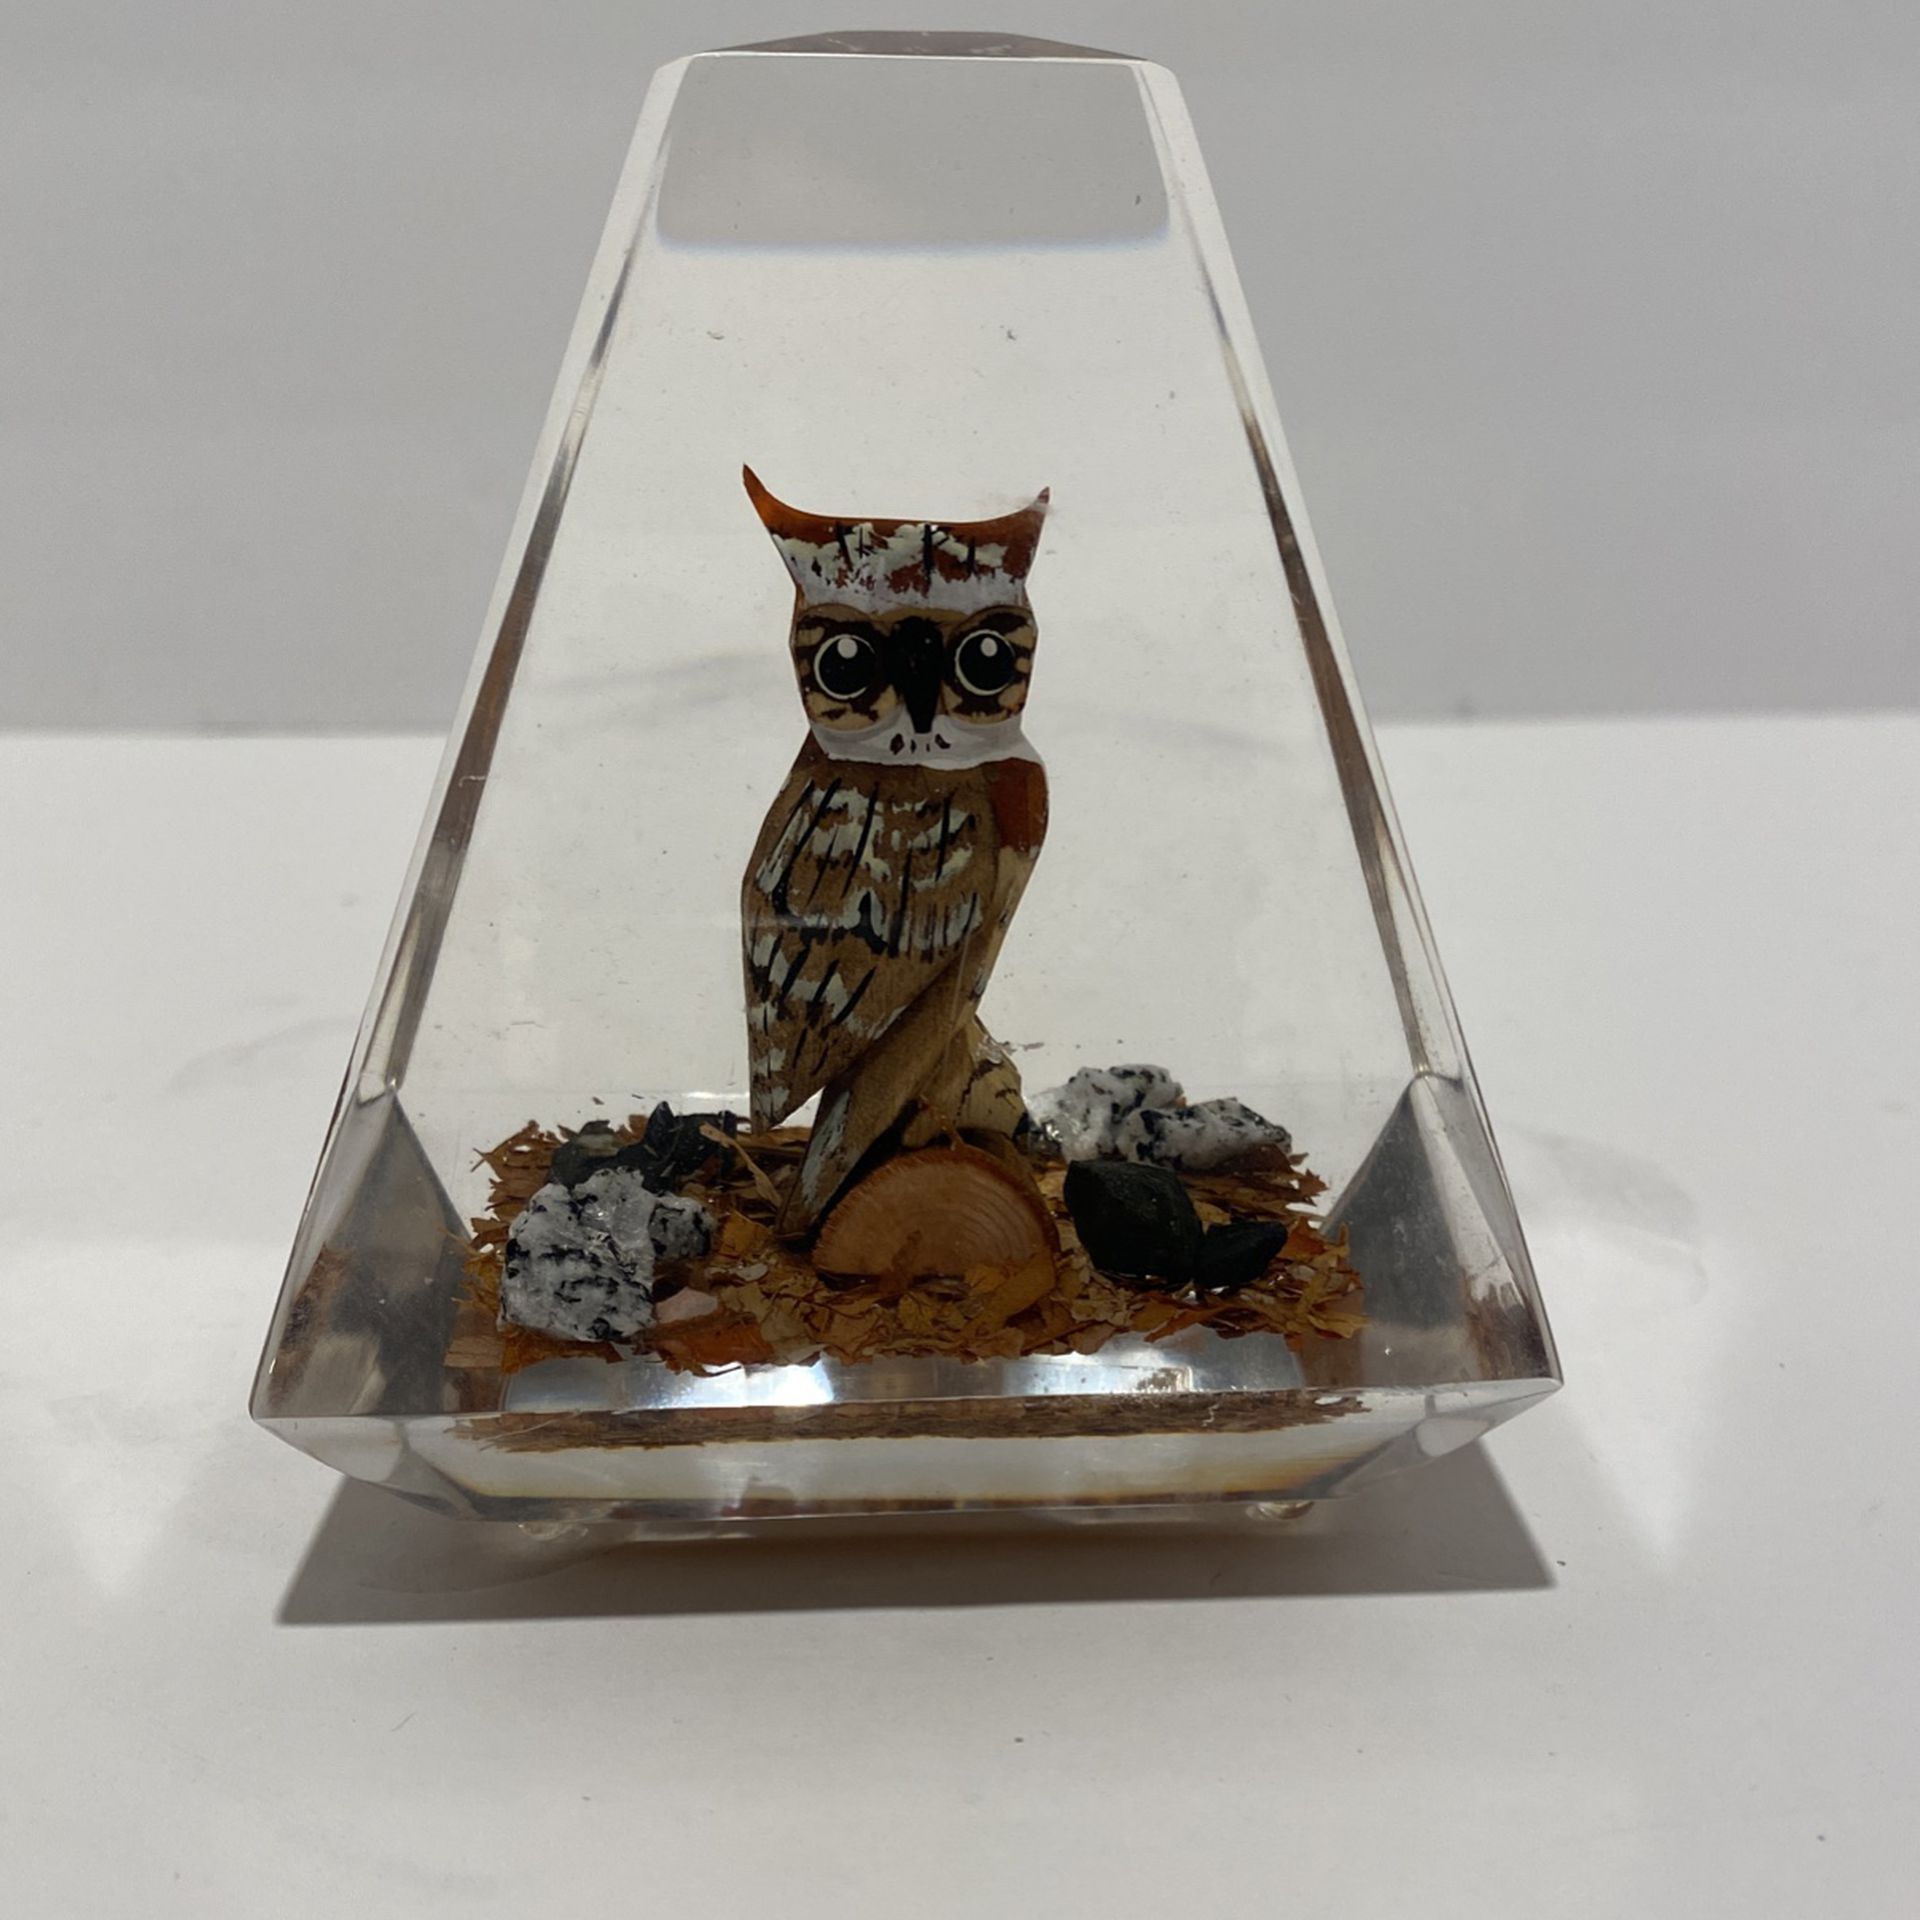 1970’s Resin Owl Paperweight - 4” Tall